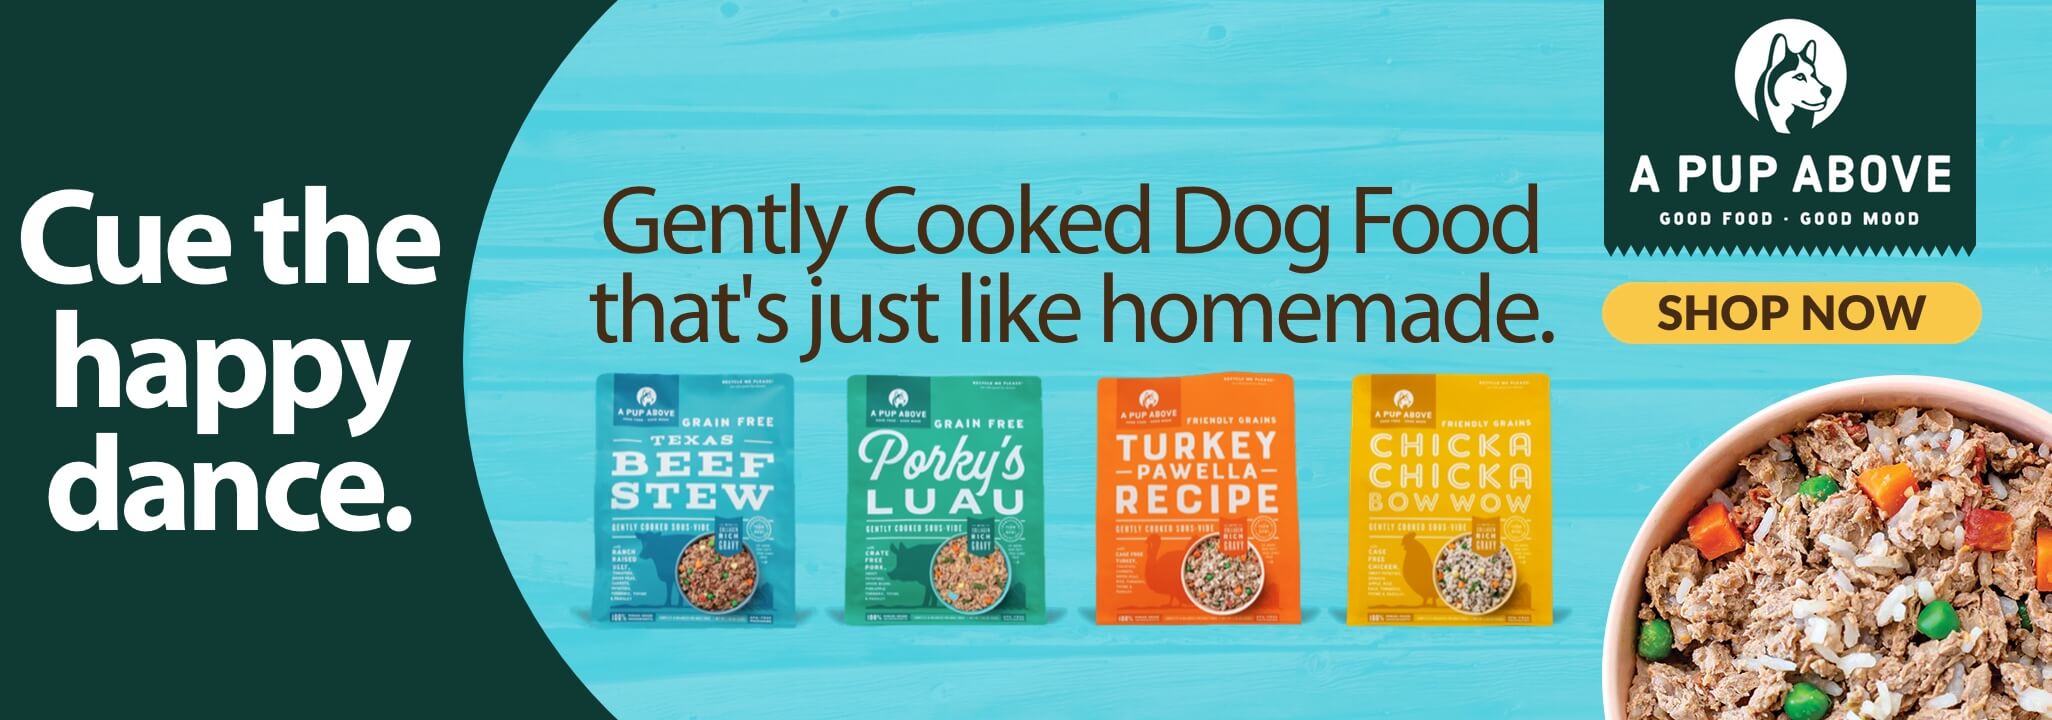 Cue the happy dance Gently Cooked Dog Food that's just like homemade A Pup Above Shop Now